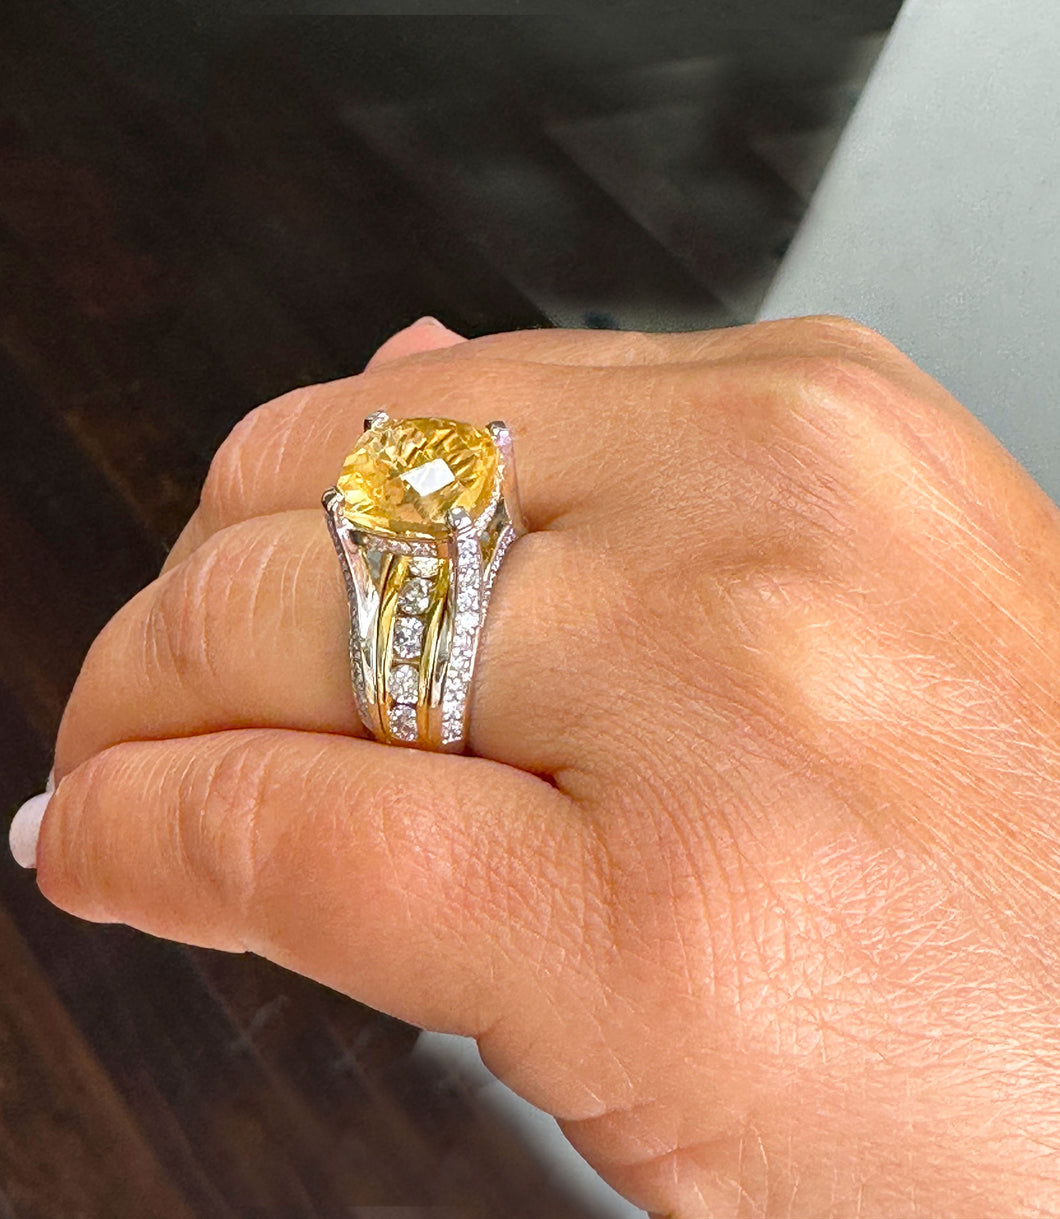 Huge, Women's 14k solid white and yellow gold cushion cut yellow citrine and natural diamond engagement ring Bridal Wedding 5.80ctw